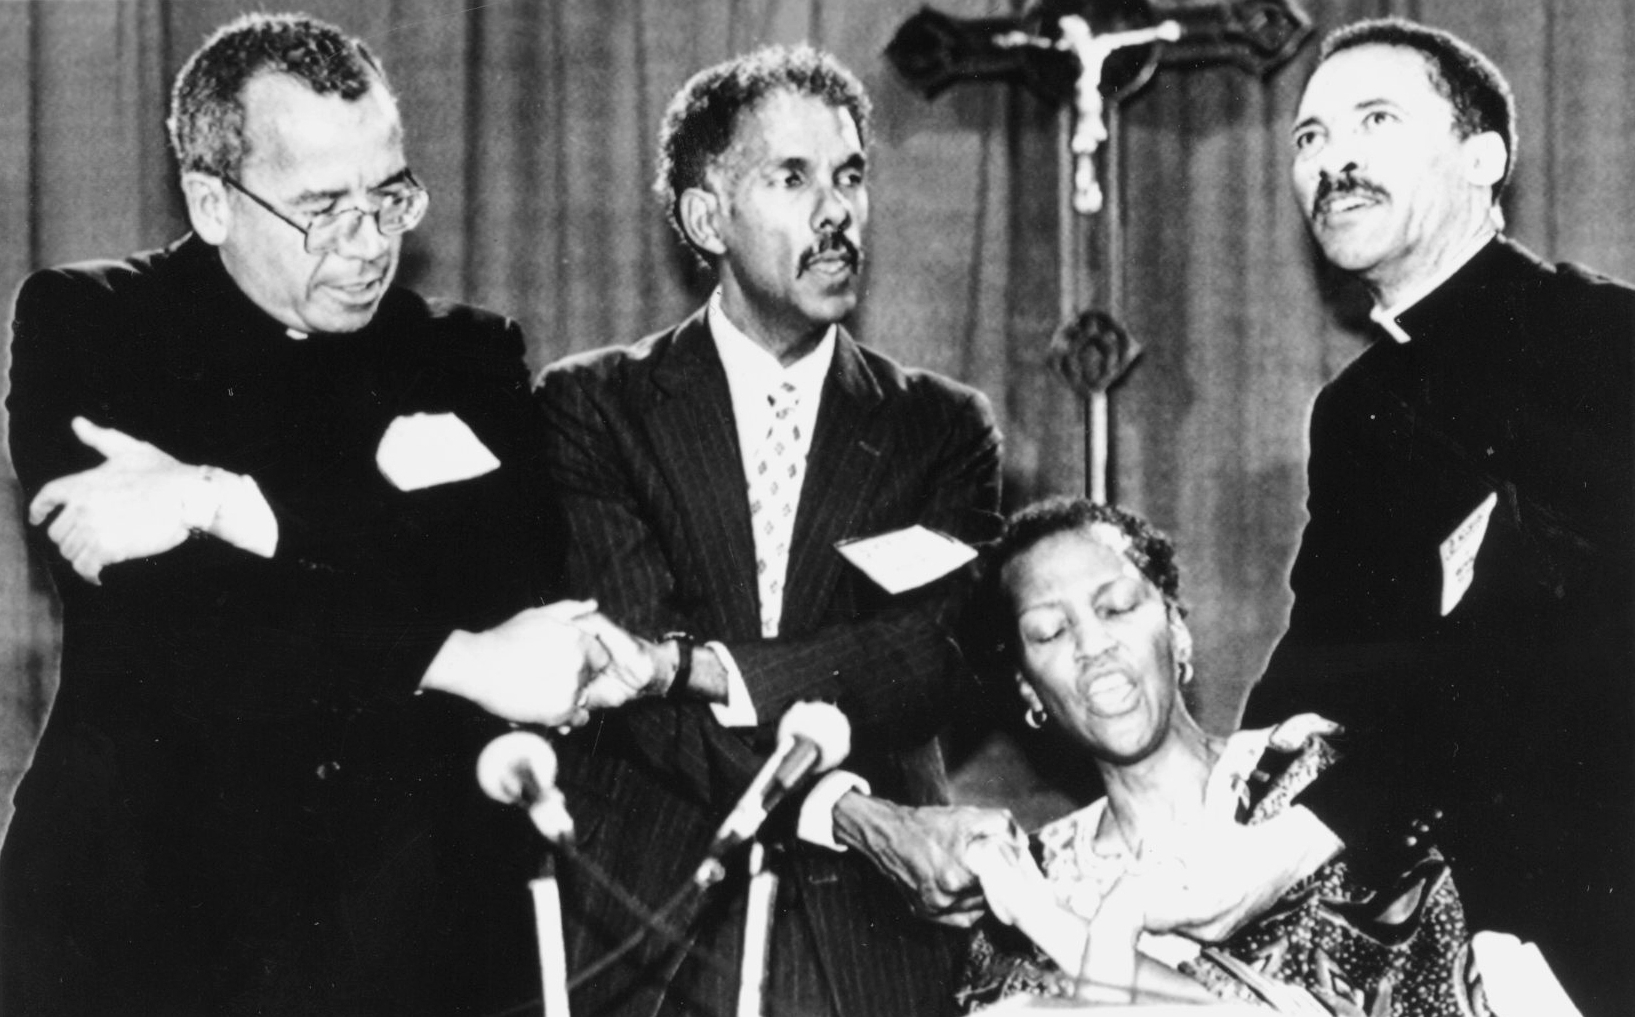 Sr. Thea Bowman, seated, leads the singing of “We Shall Overcome” during the U.S. bishops’ meeting in South Orange, New Jersey, June 19, 1989. With Bowman are, standing from left, Atlanta Archbishop Eugene Marino, Albert Raboteau and Baltimore Bishop John